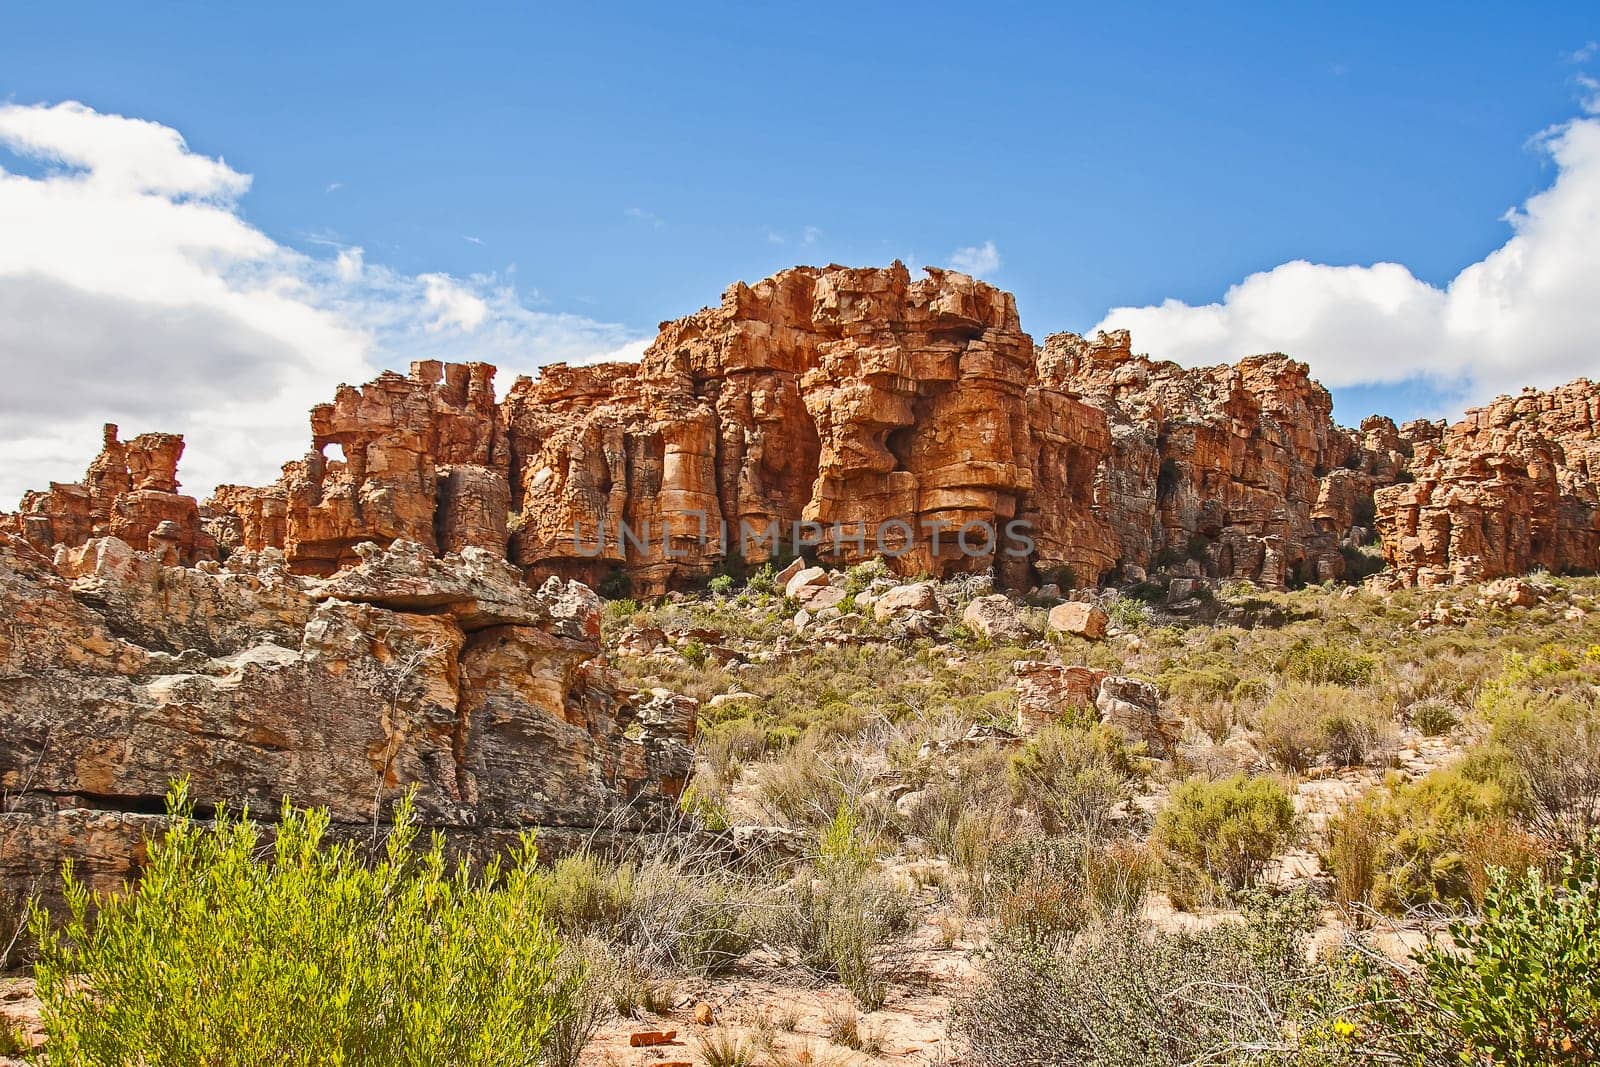 Cederberg Rock Formations 12821 by kobus_peche